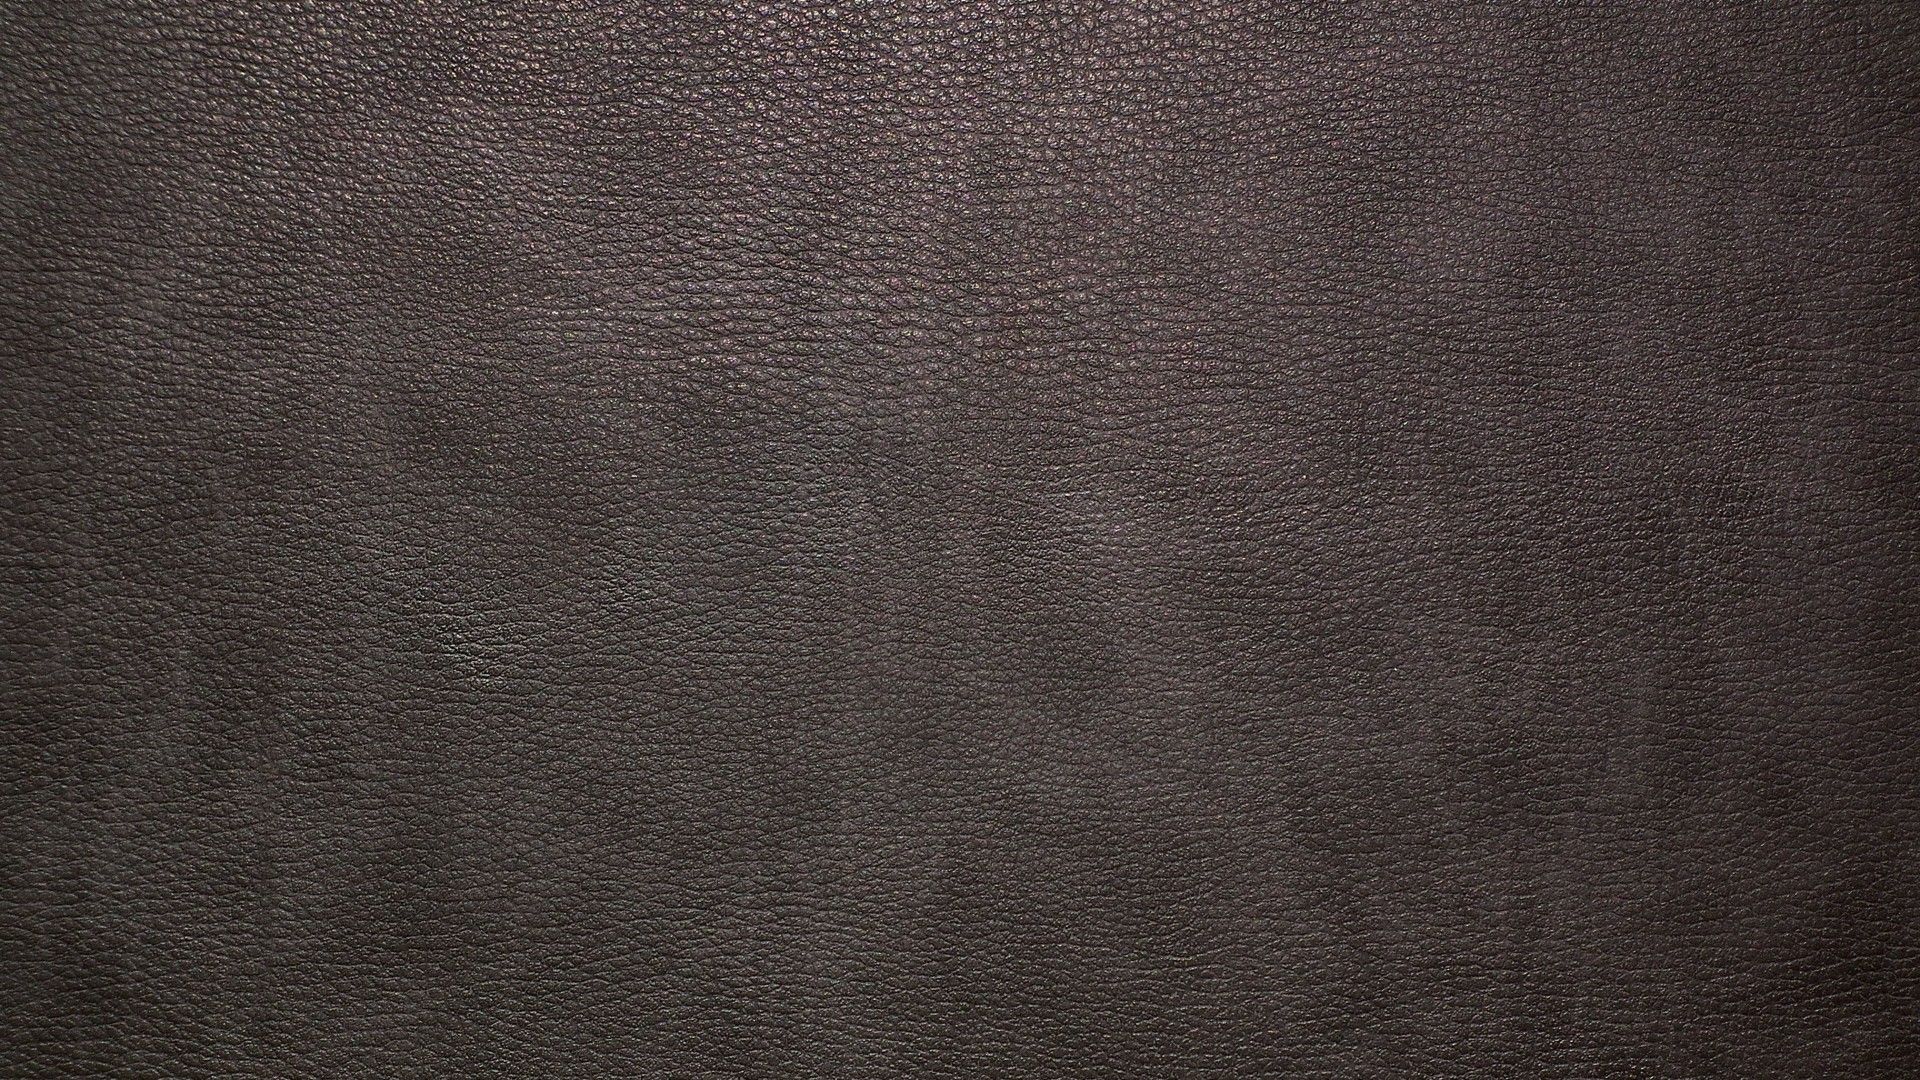 Leather Texture Wallpapers 4k Hd, Leather Wall Paper